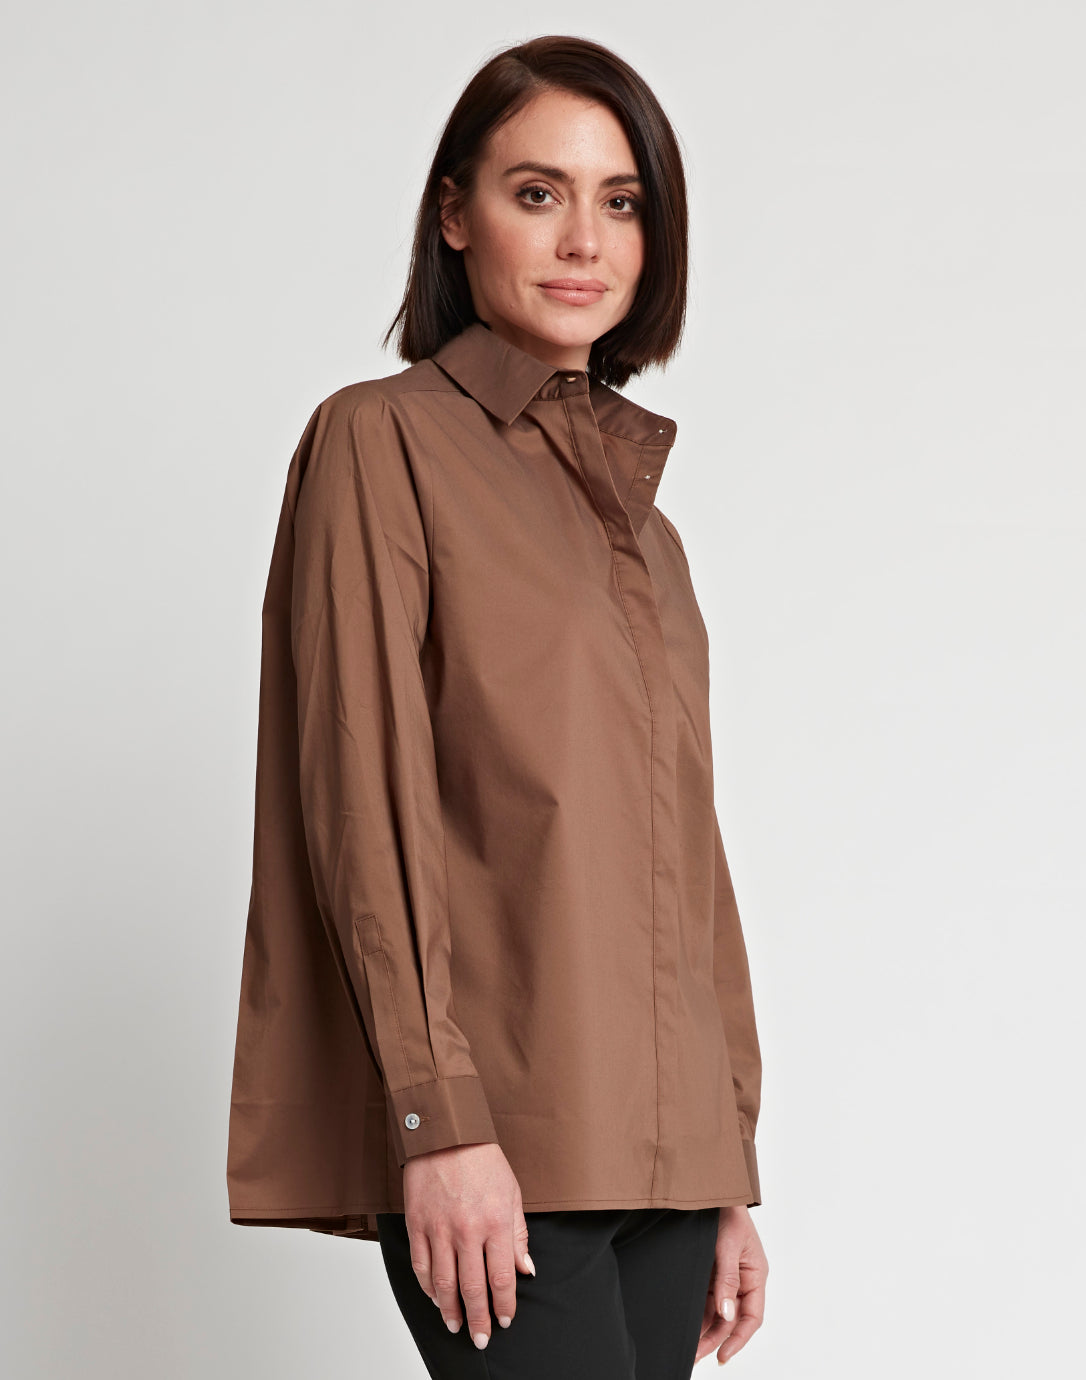 Willow & Root Pleated Shirt - Women's Shirts/Blouses in Brown